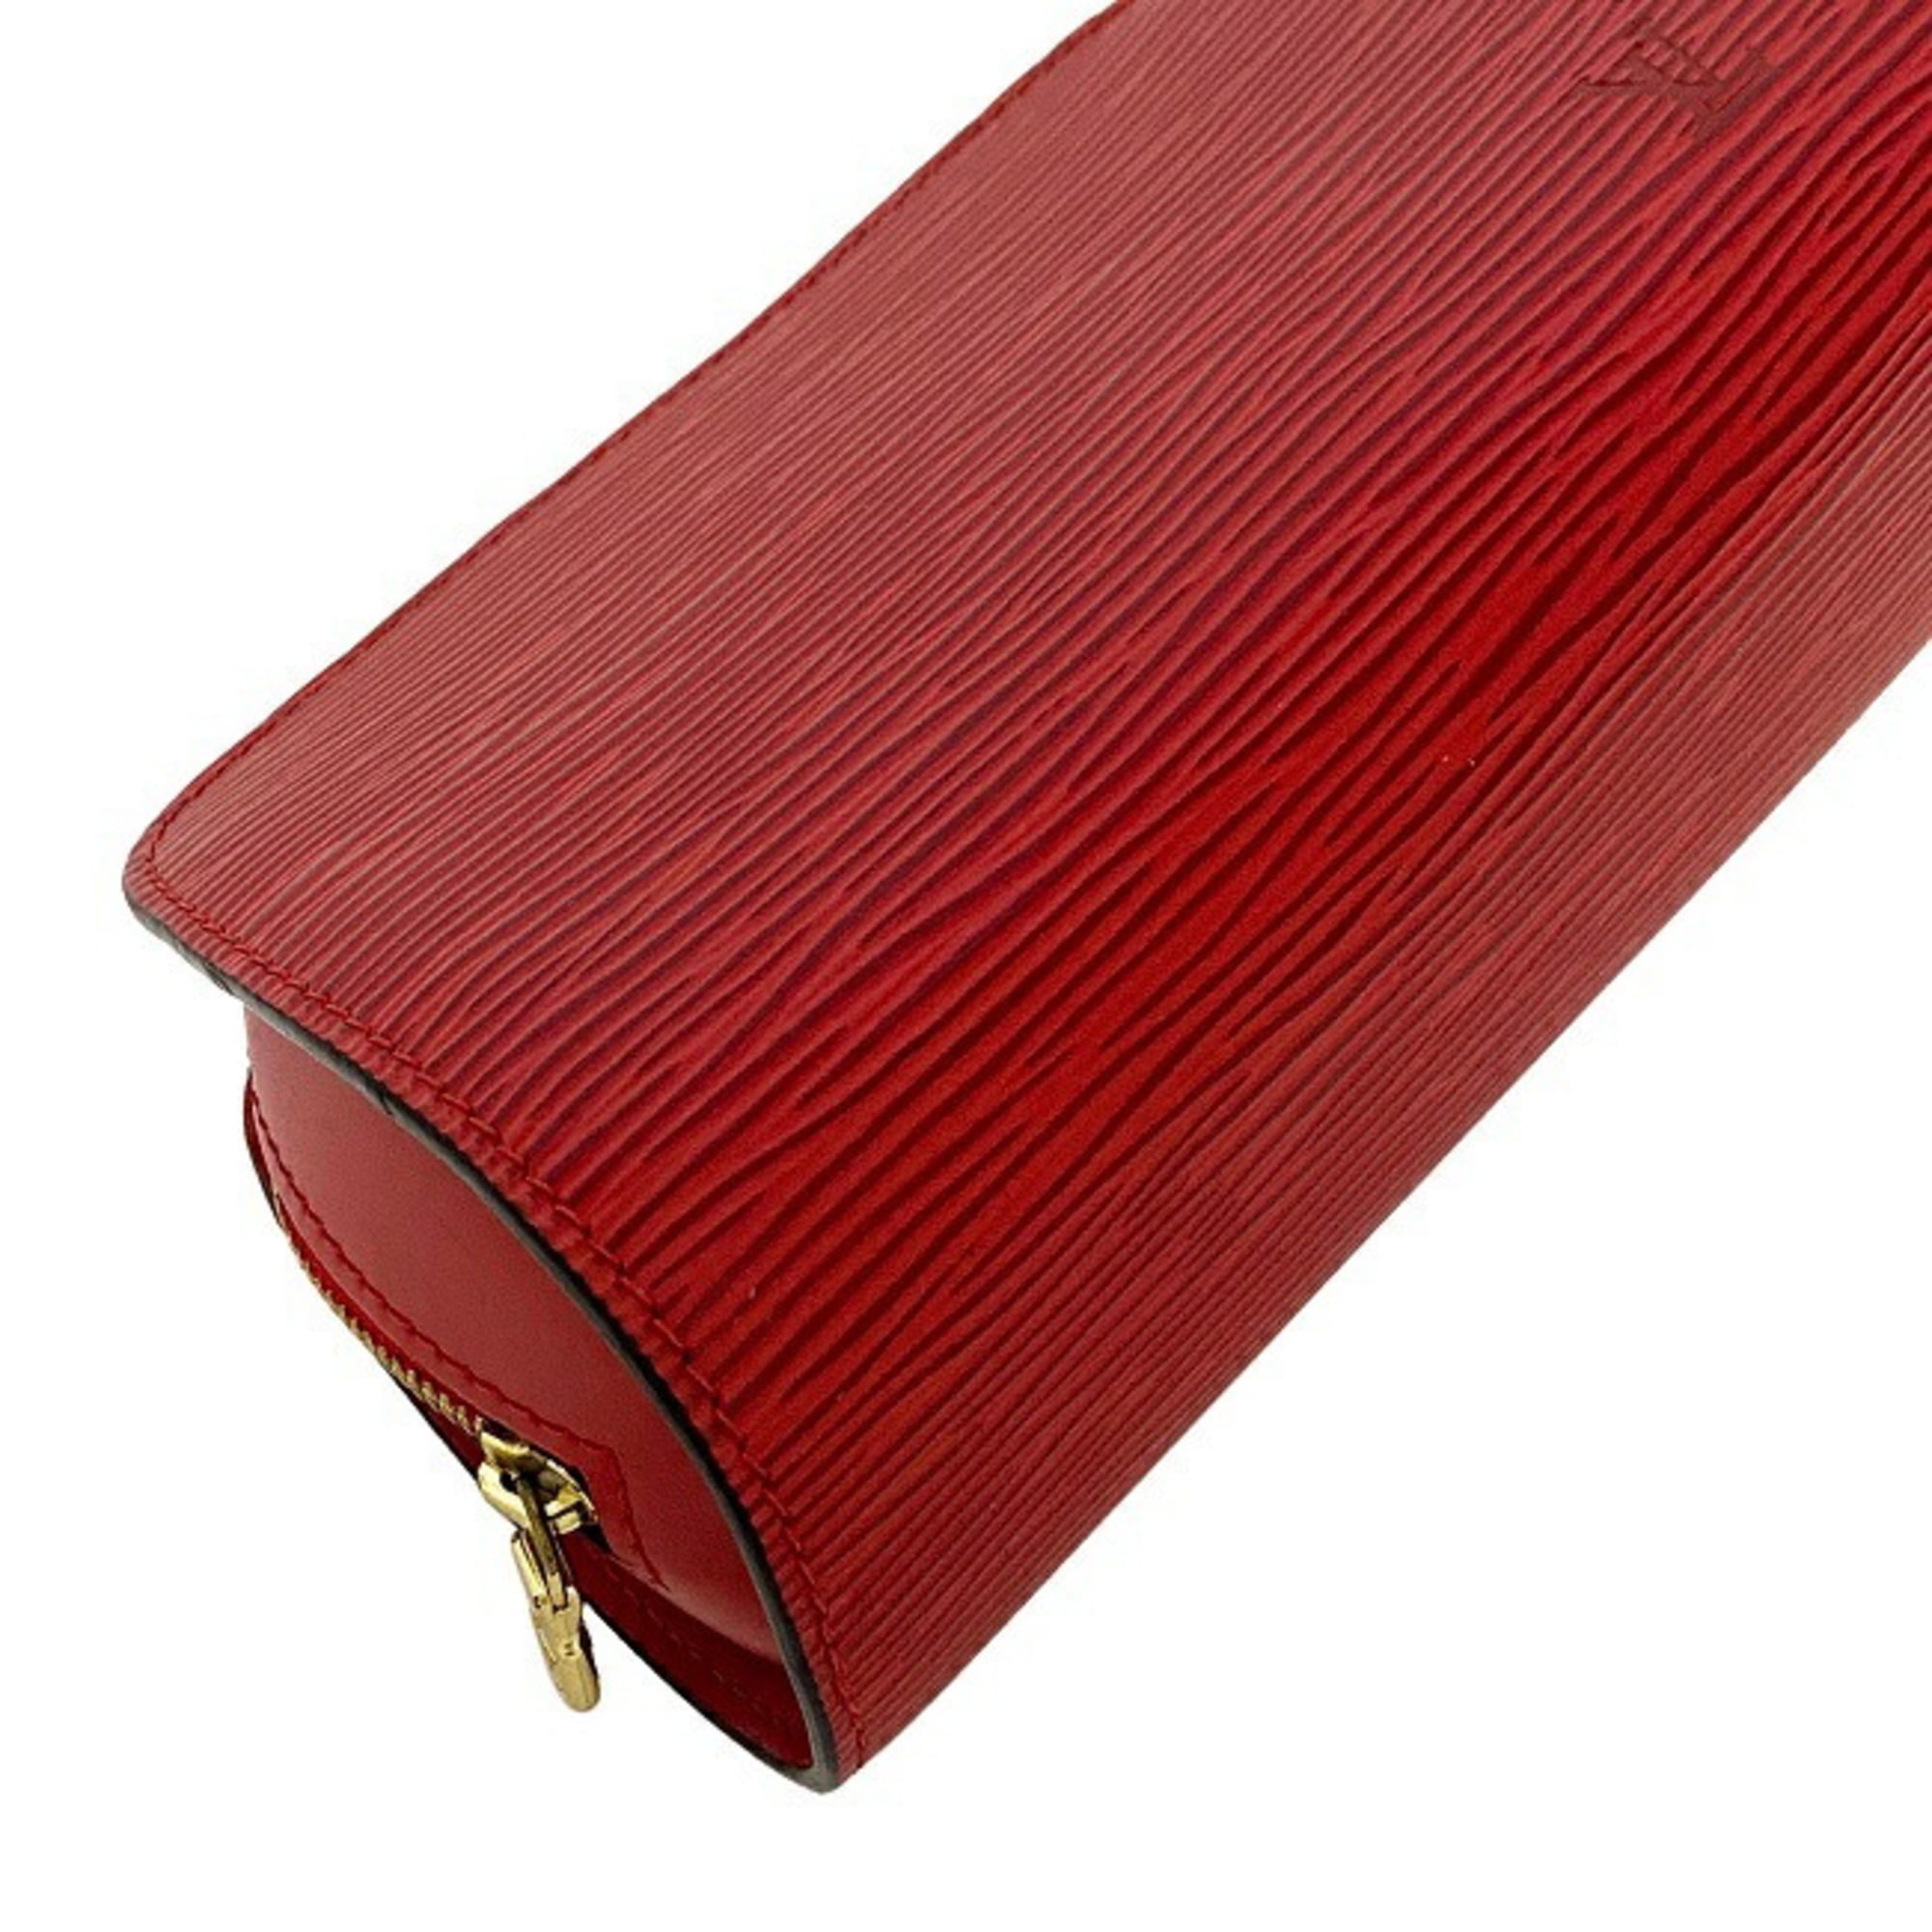 Authentic Louis Vuitton Epi Dauphine Cosmetic Pouch Red M48447 LV 4755G